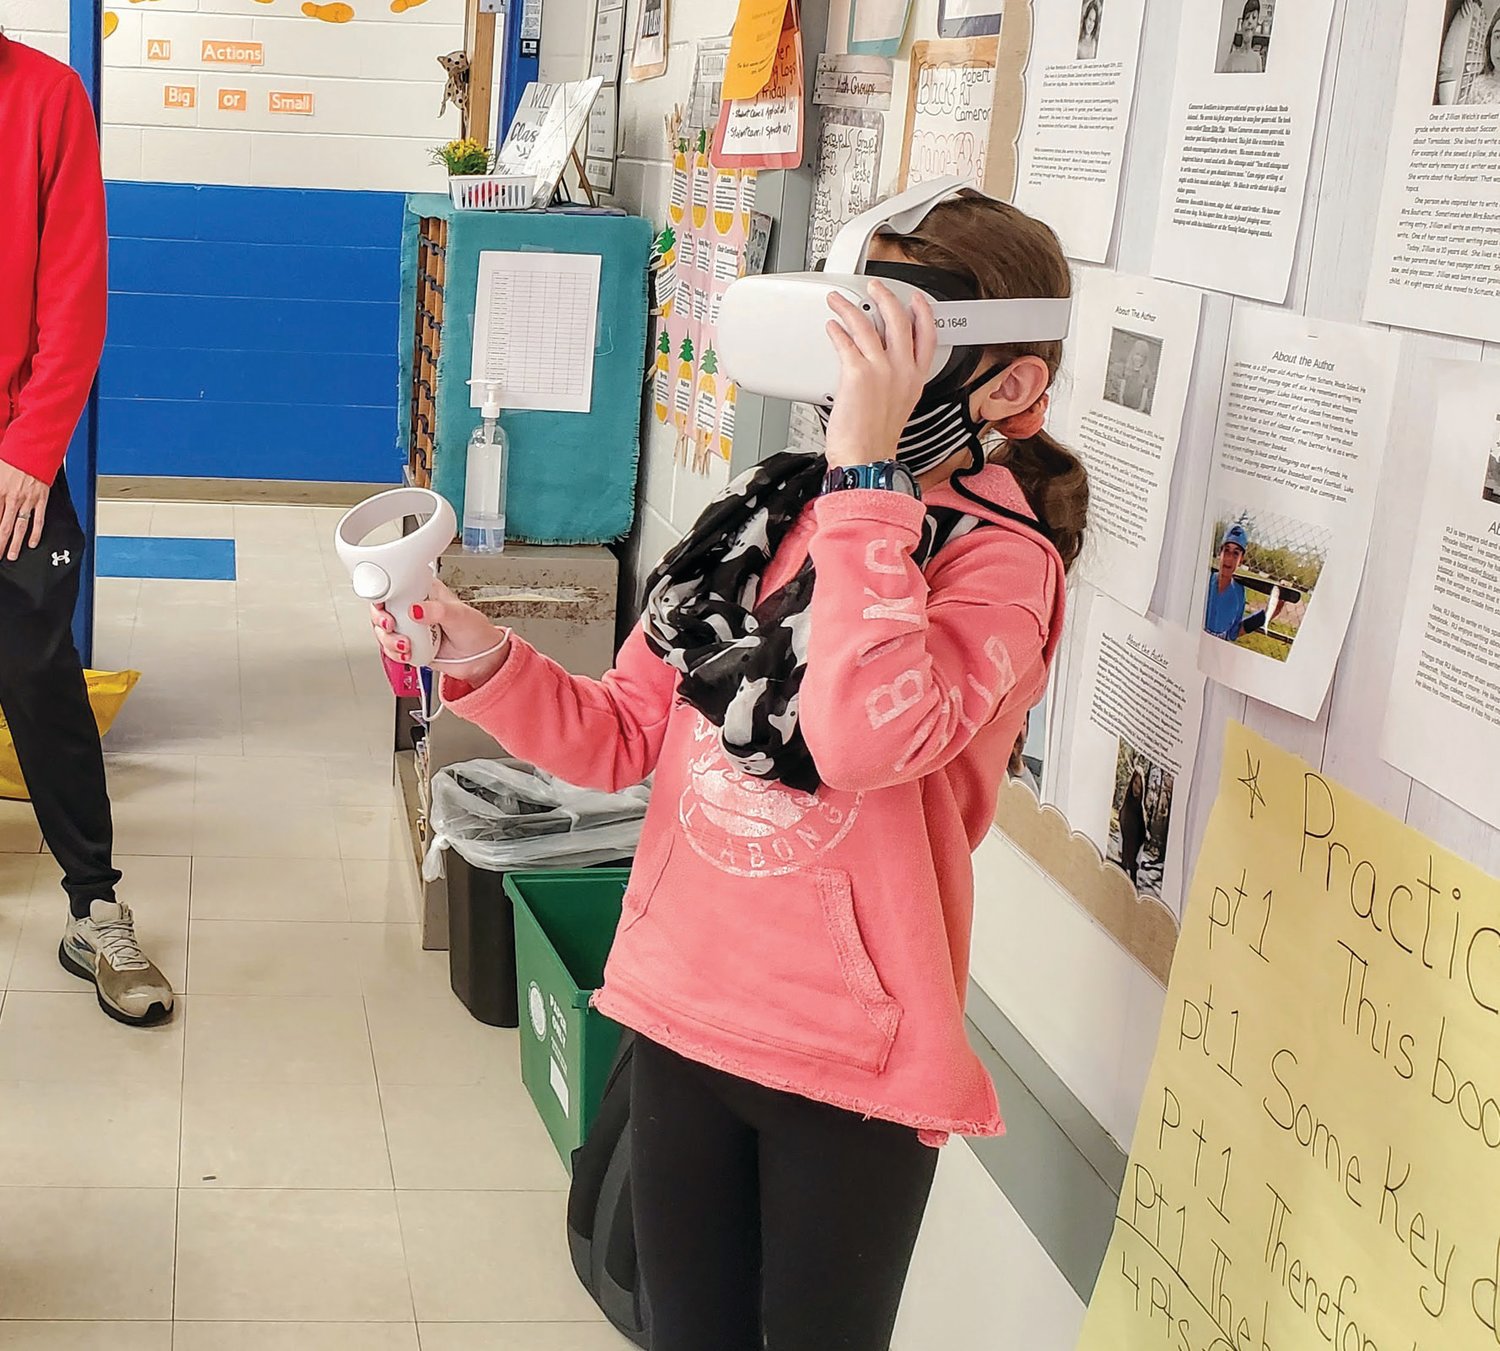 THE OTHER VIRTUAL LEARNING: A Scituate student adjusts a machine in a virtual reality environment. The Scituate Career & Technology Education program uses virtual reality and GIS technology to help students explore potential career options.